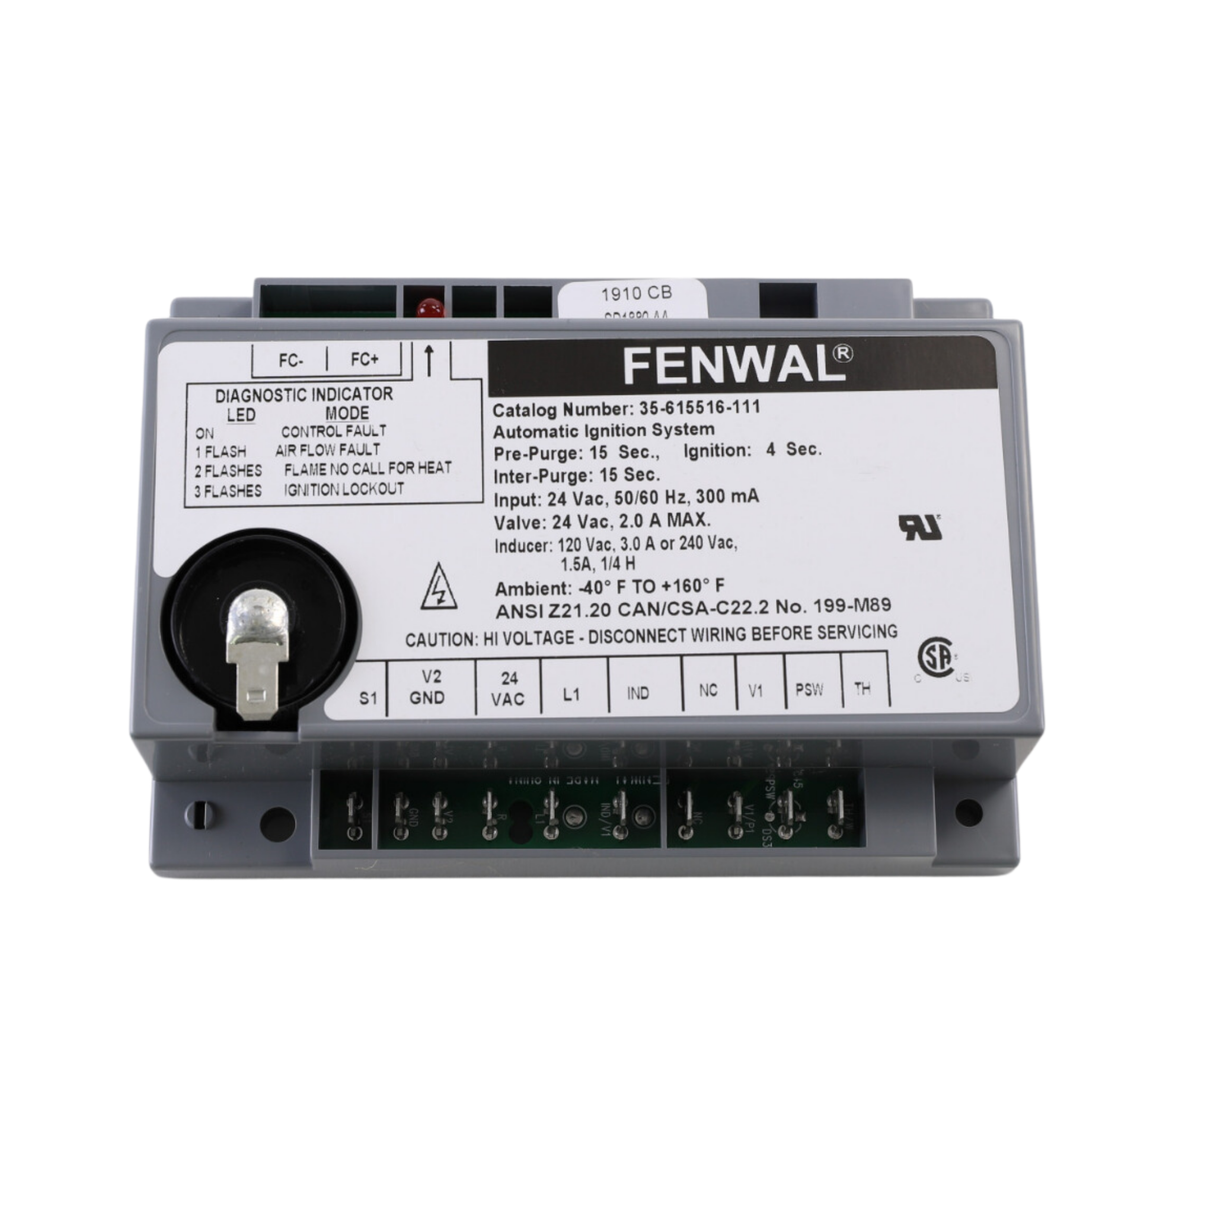 Fenwal 35-615516-111 24V, 15s Pre-Purge, 15s Inter-Purge, 4s Ignition Time, Automatic Ignition System